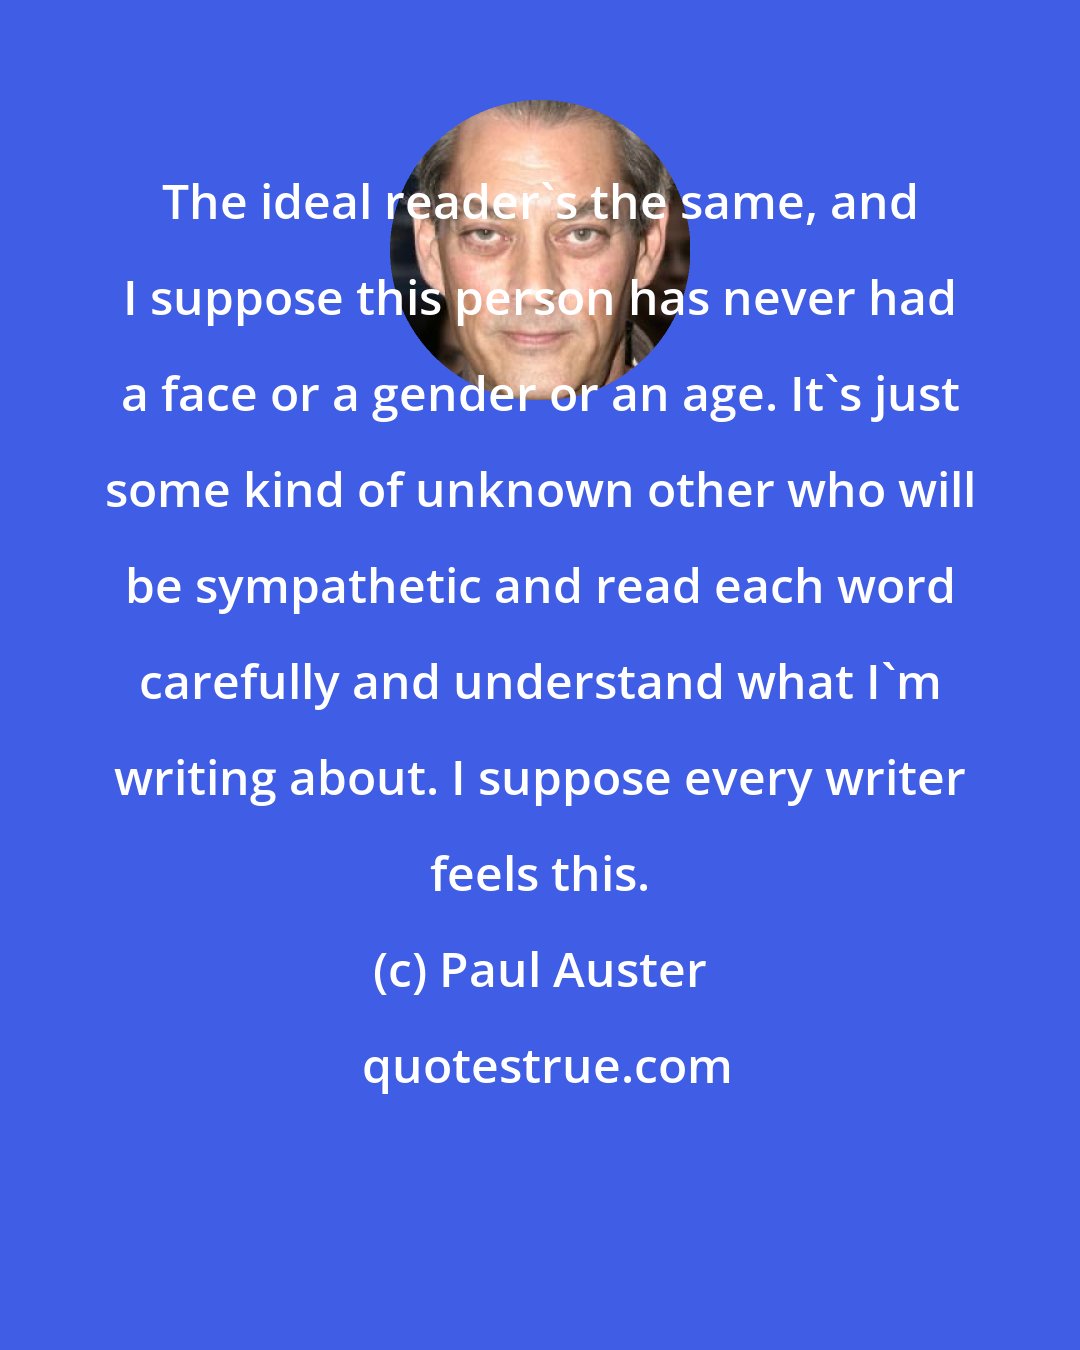 Paul Auster: The ideal reader's the same, and I suppose this person has never had a face or a gender or an age. It's just some kind of unknown other who will be sympathetic and read each word carefully and understand what I'm writing about. I suppose every writer feels this.